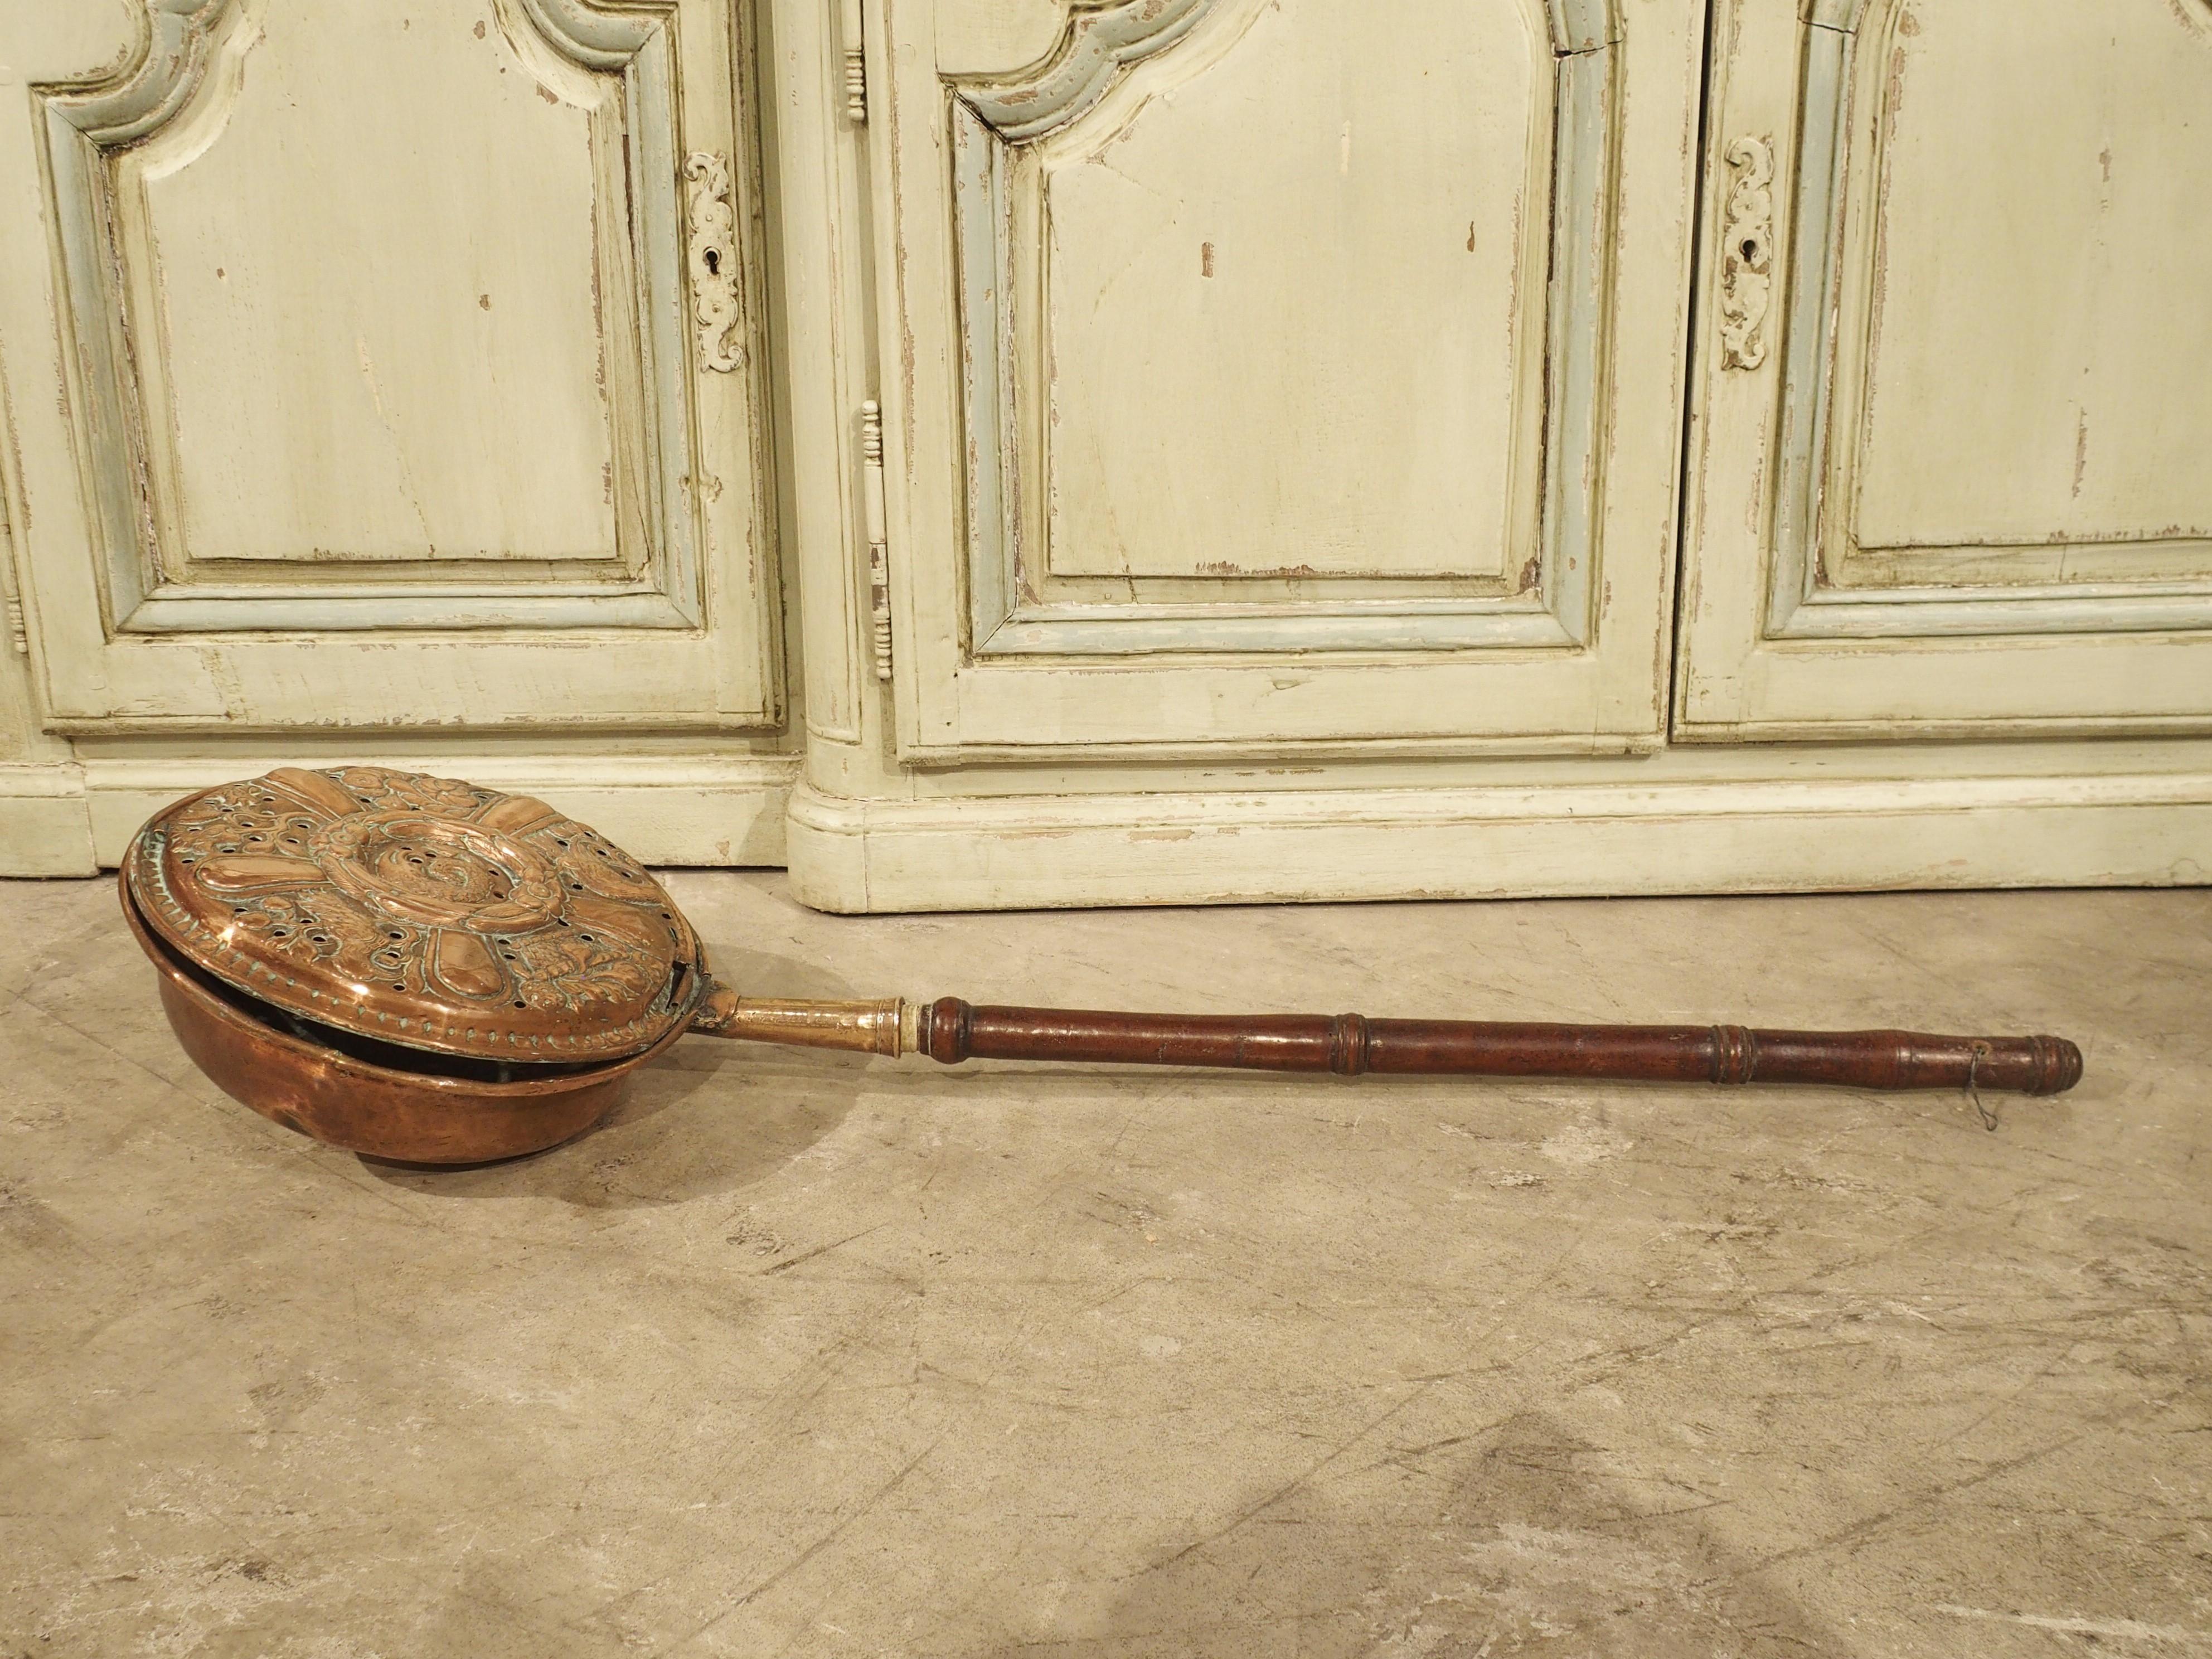 This French copper bassinoire, or bed warmer, has a wooden handle and was produced in the 1700’s. Hot coals would be placed into a bassinoire’s vented receptacle, and the user would pass the device under the covers, warming the bed. Copper was the